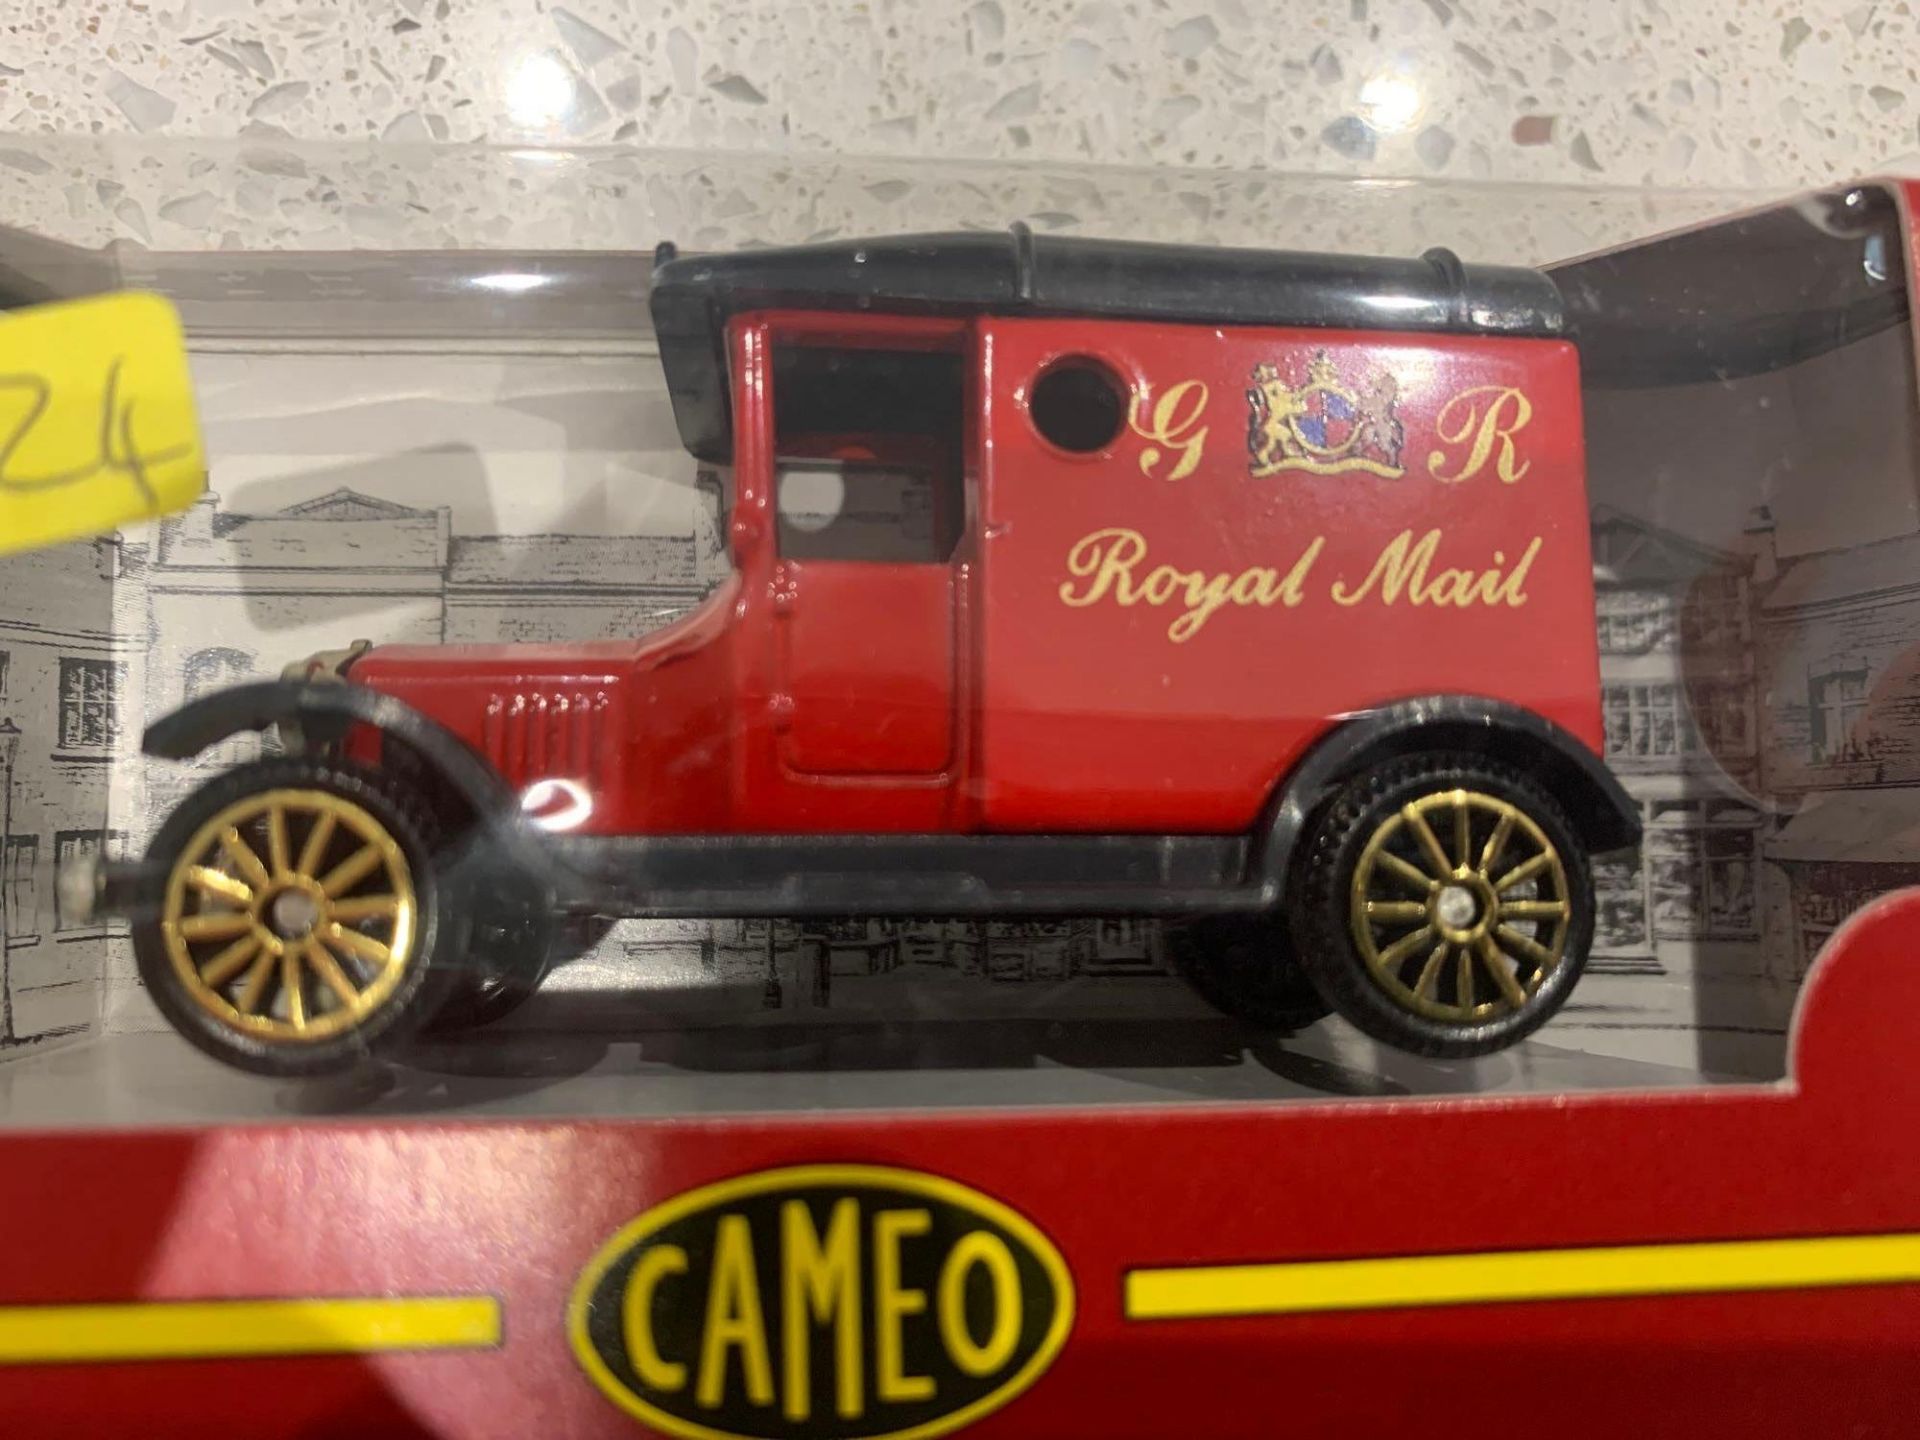 2 X Cameo Trucks 2 X King George Royal Mail Marked Vehicles Truck And Van - Image 5 of 6